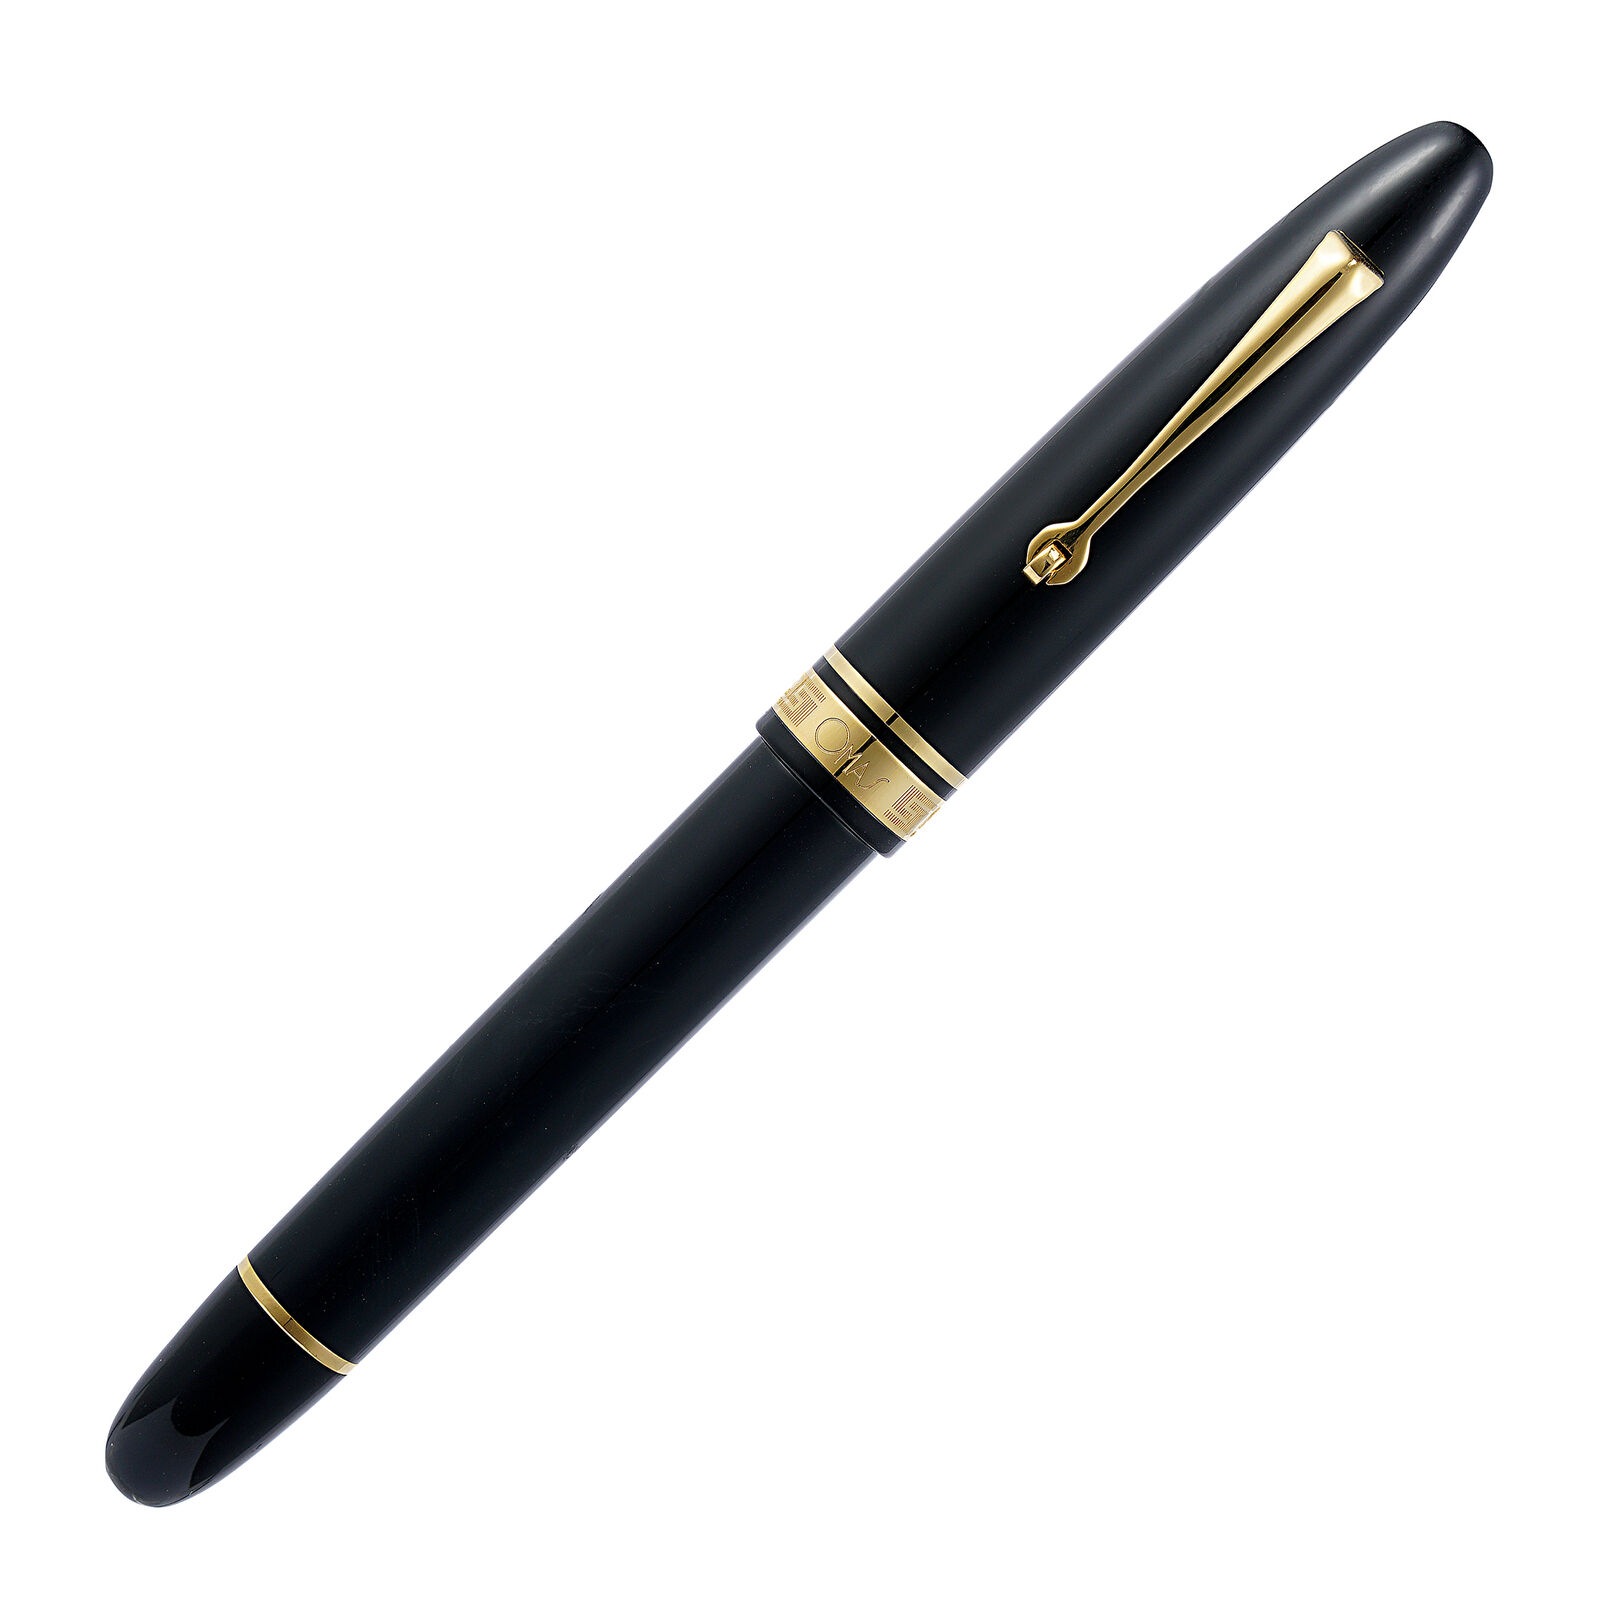 Omas Ogiva Fountain Pen in Nera with Gold Trim - Broad Point - NEW in Box